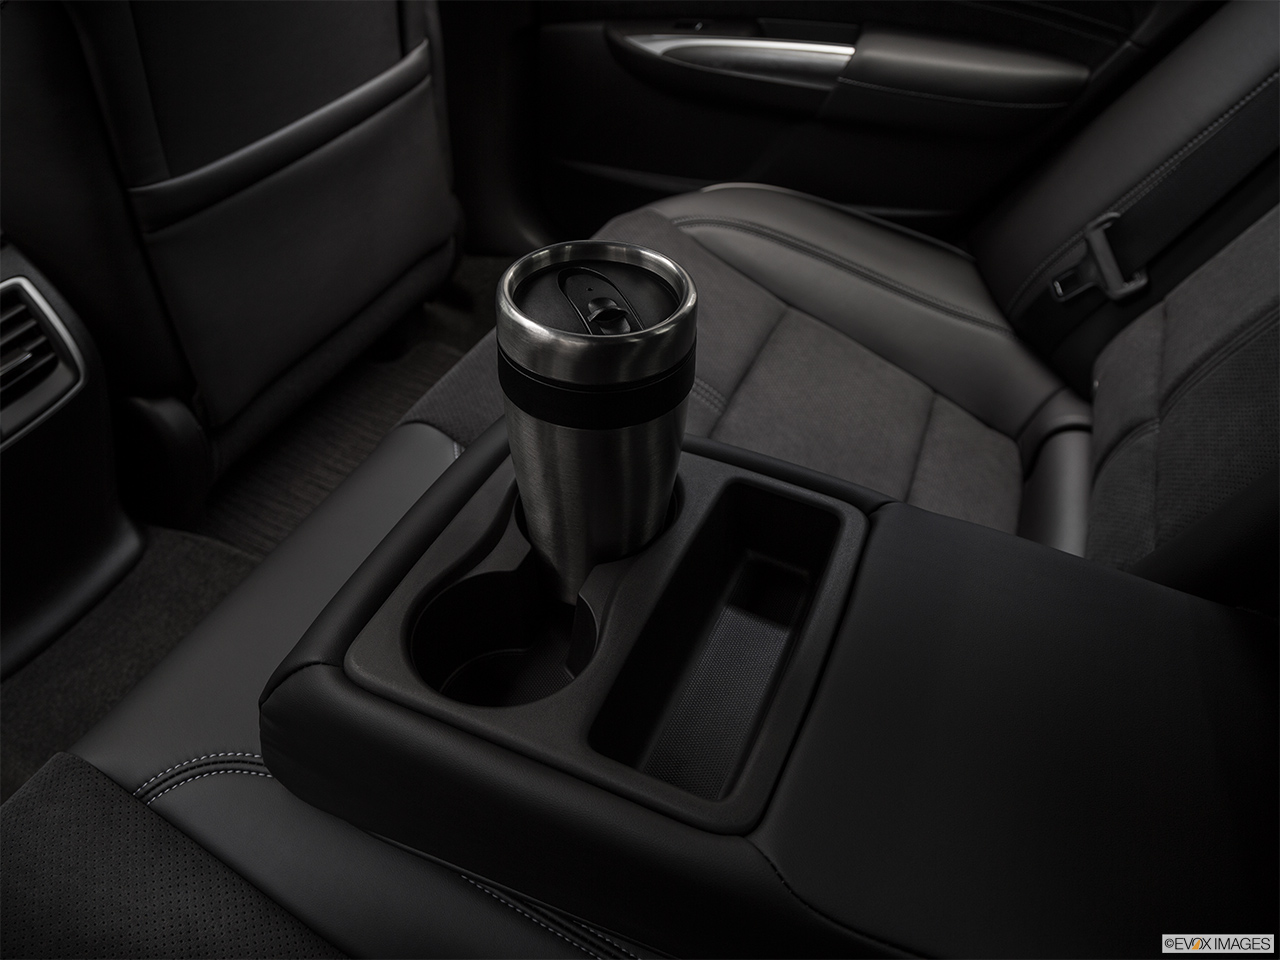 2019 Acura TLX 3.5L Cup holder prop (quaternary). 